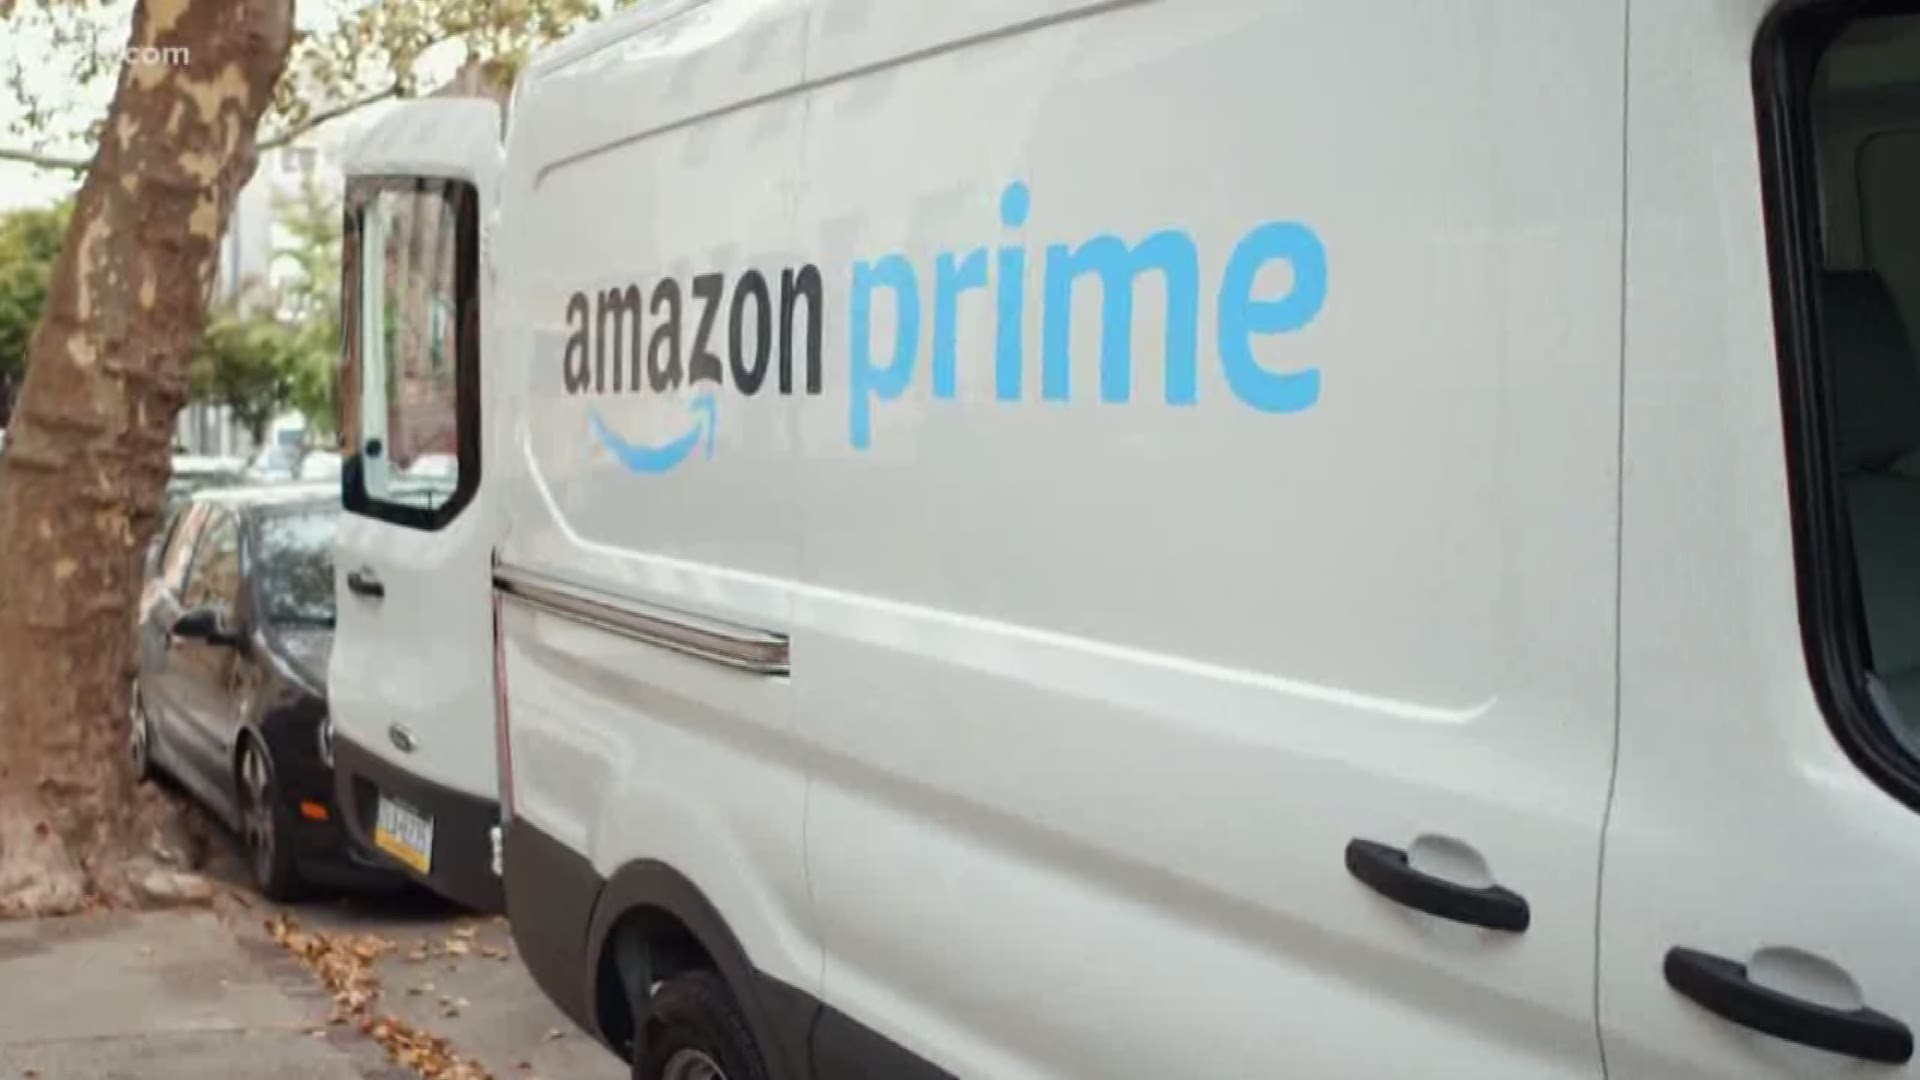 Amazon's new in-home delivery service